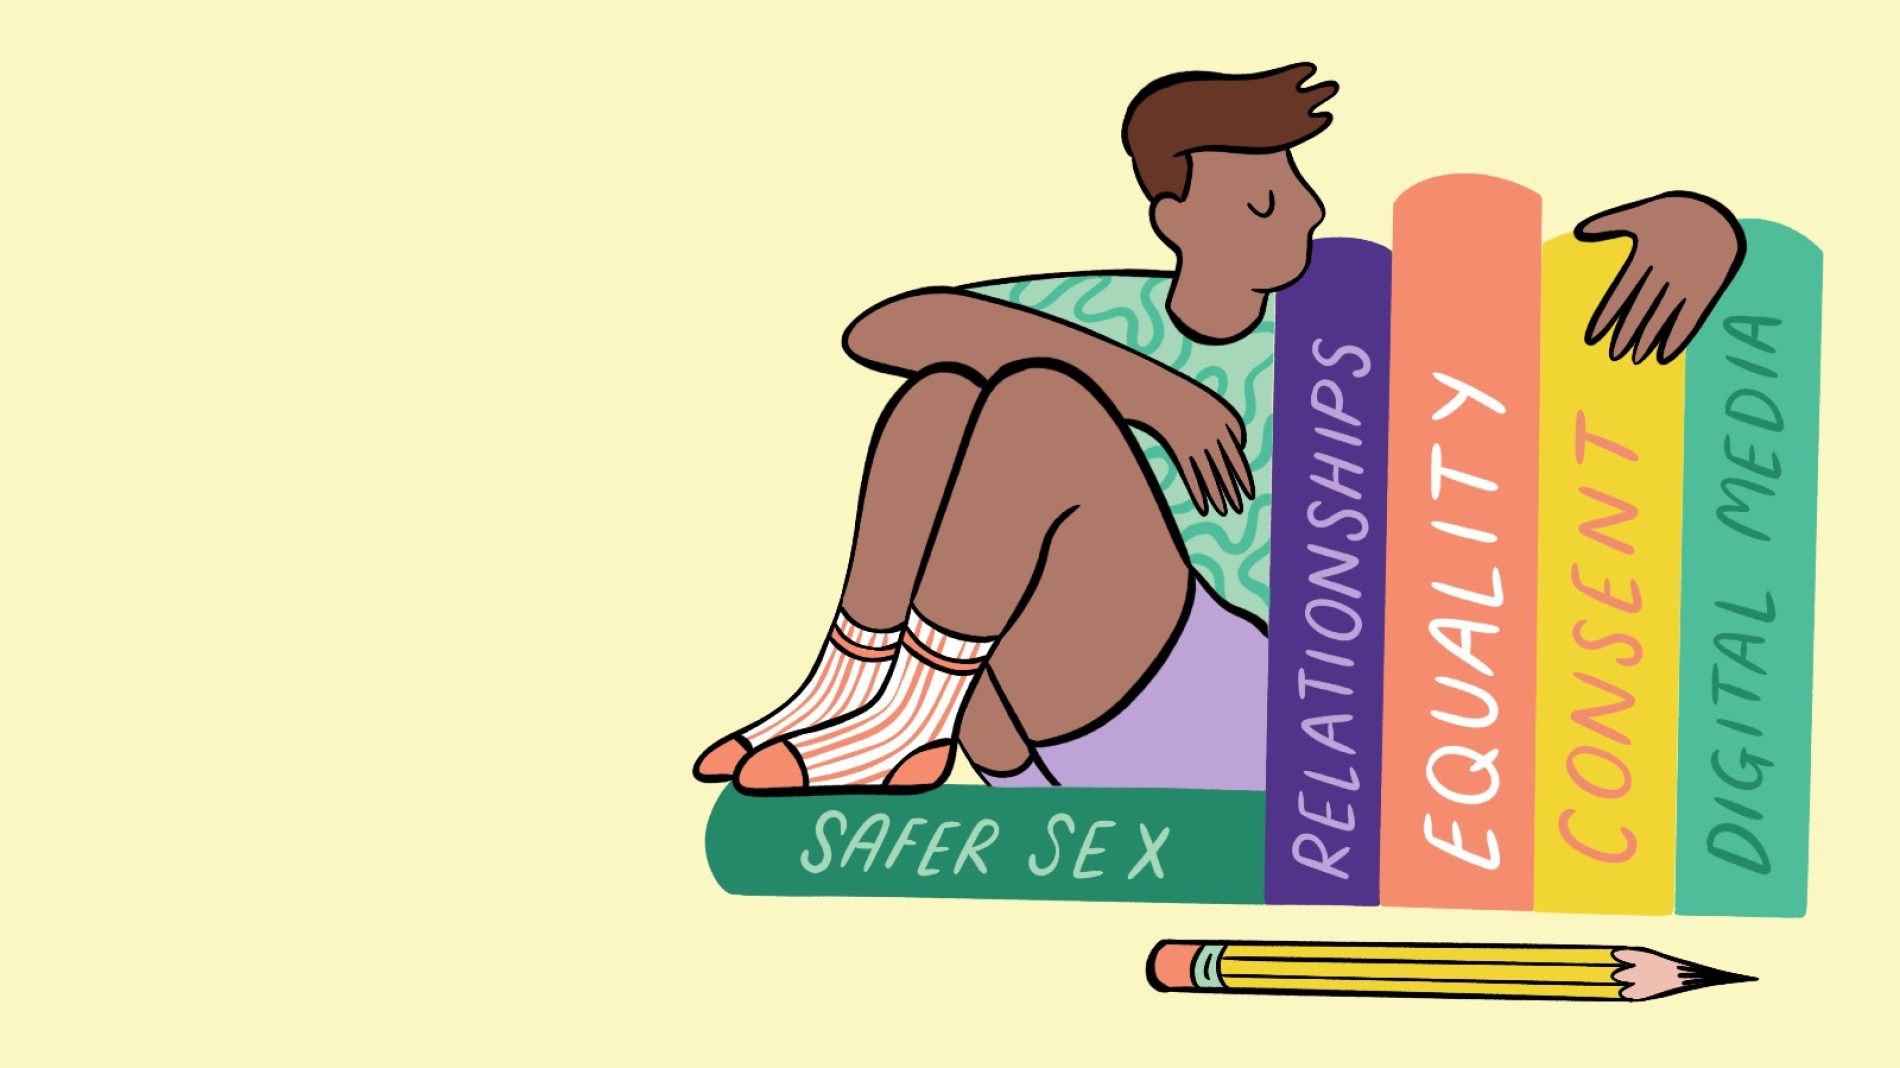 a masculine person sits beside books titled 'safer sex', 'relationships', 'equlaity', 'consent', 'digital media' all topics on new sex education ireland programme